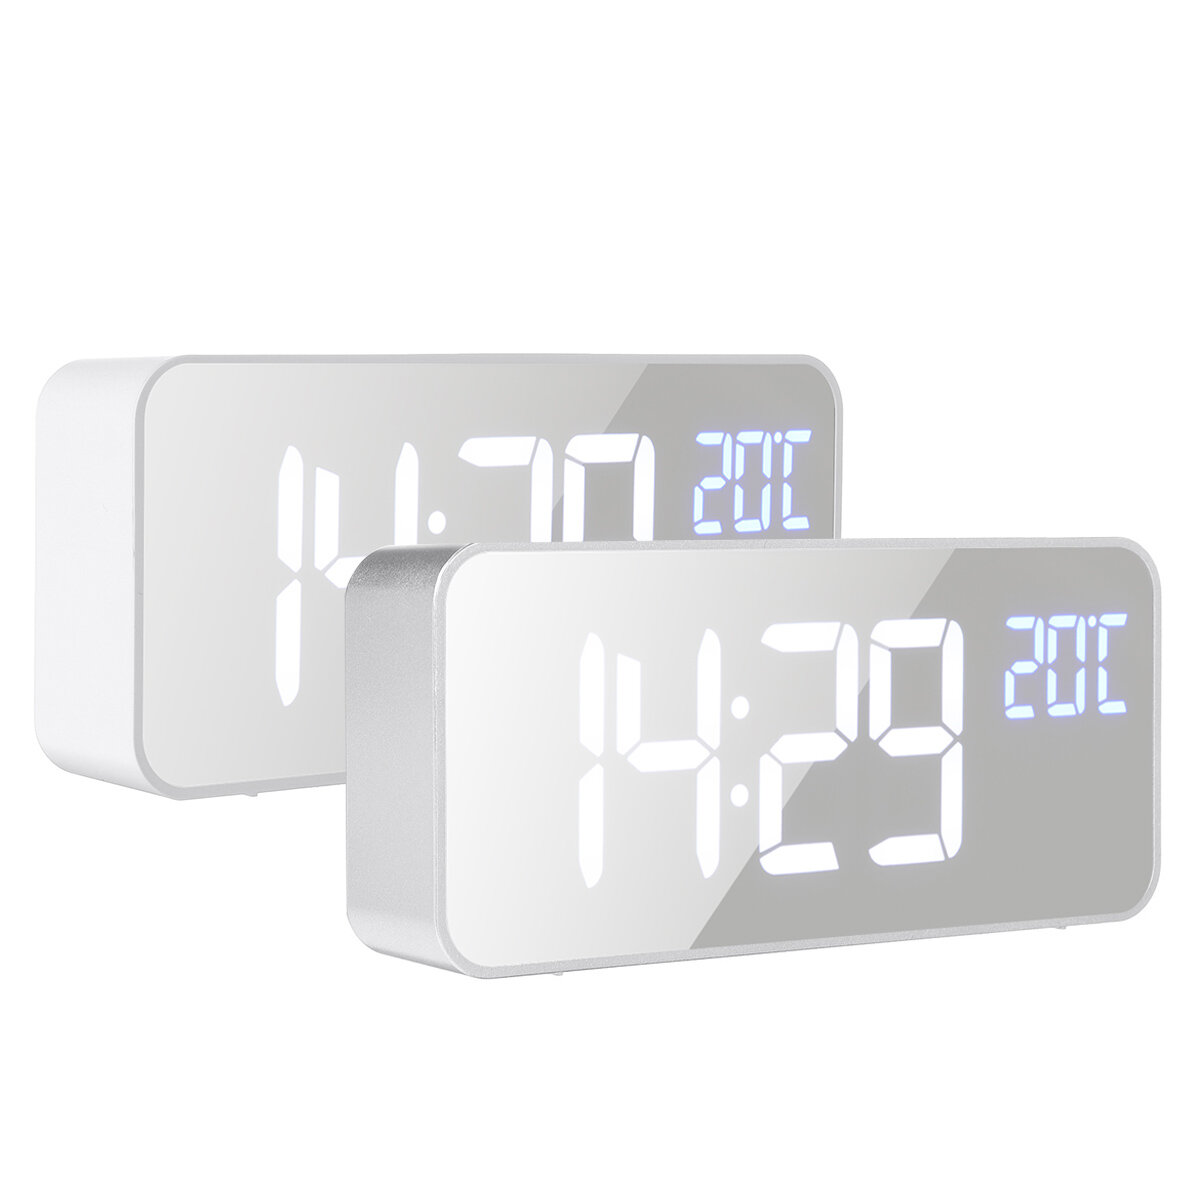 5V 1A Digital Mirror Music LED Clock with Voice Control Two sets of Alarm Switches